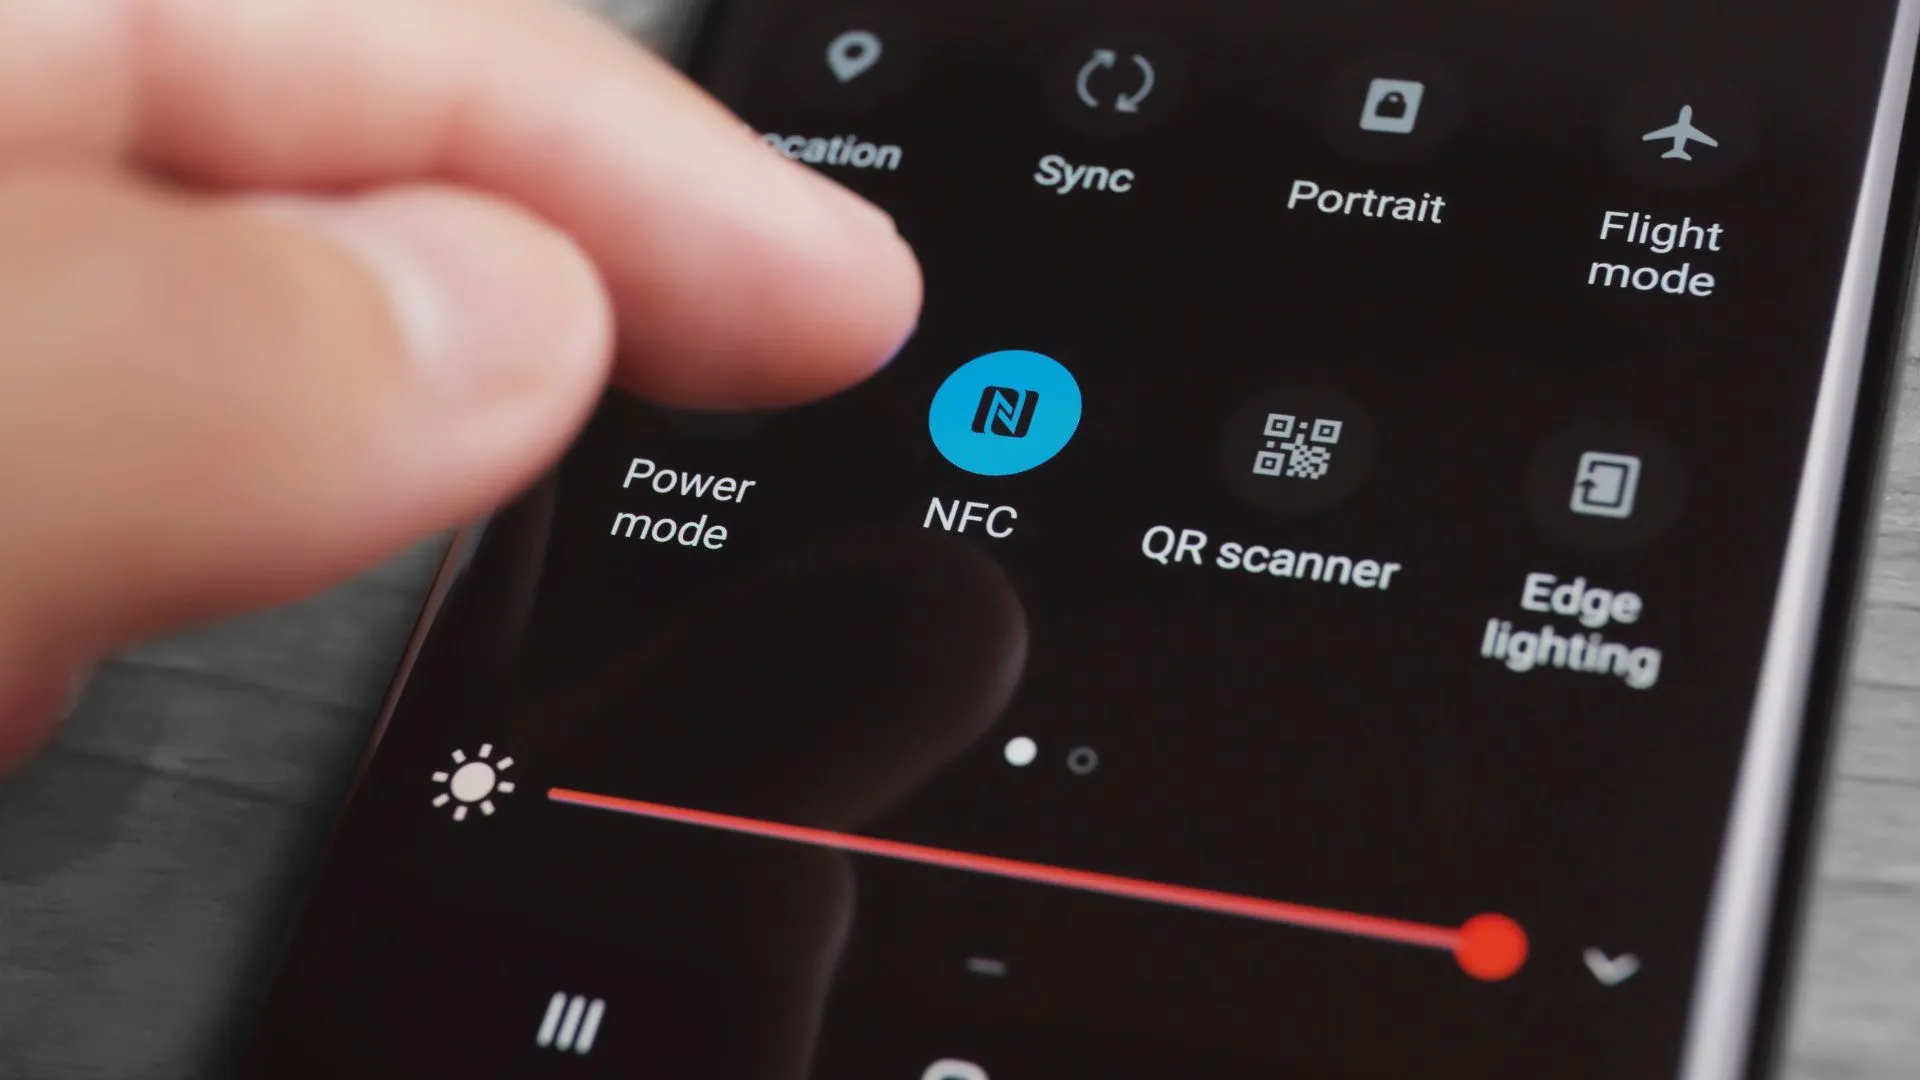 Android: Activate NFC function